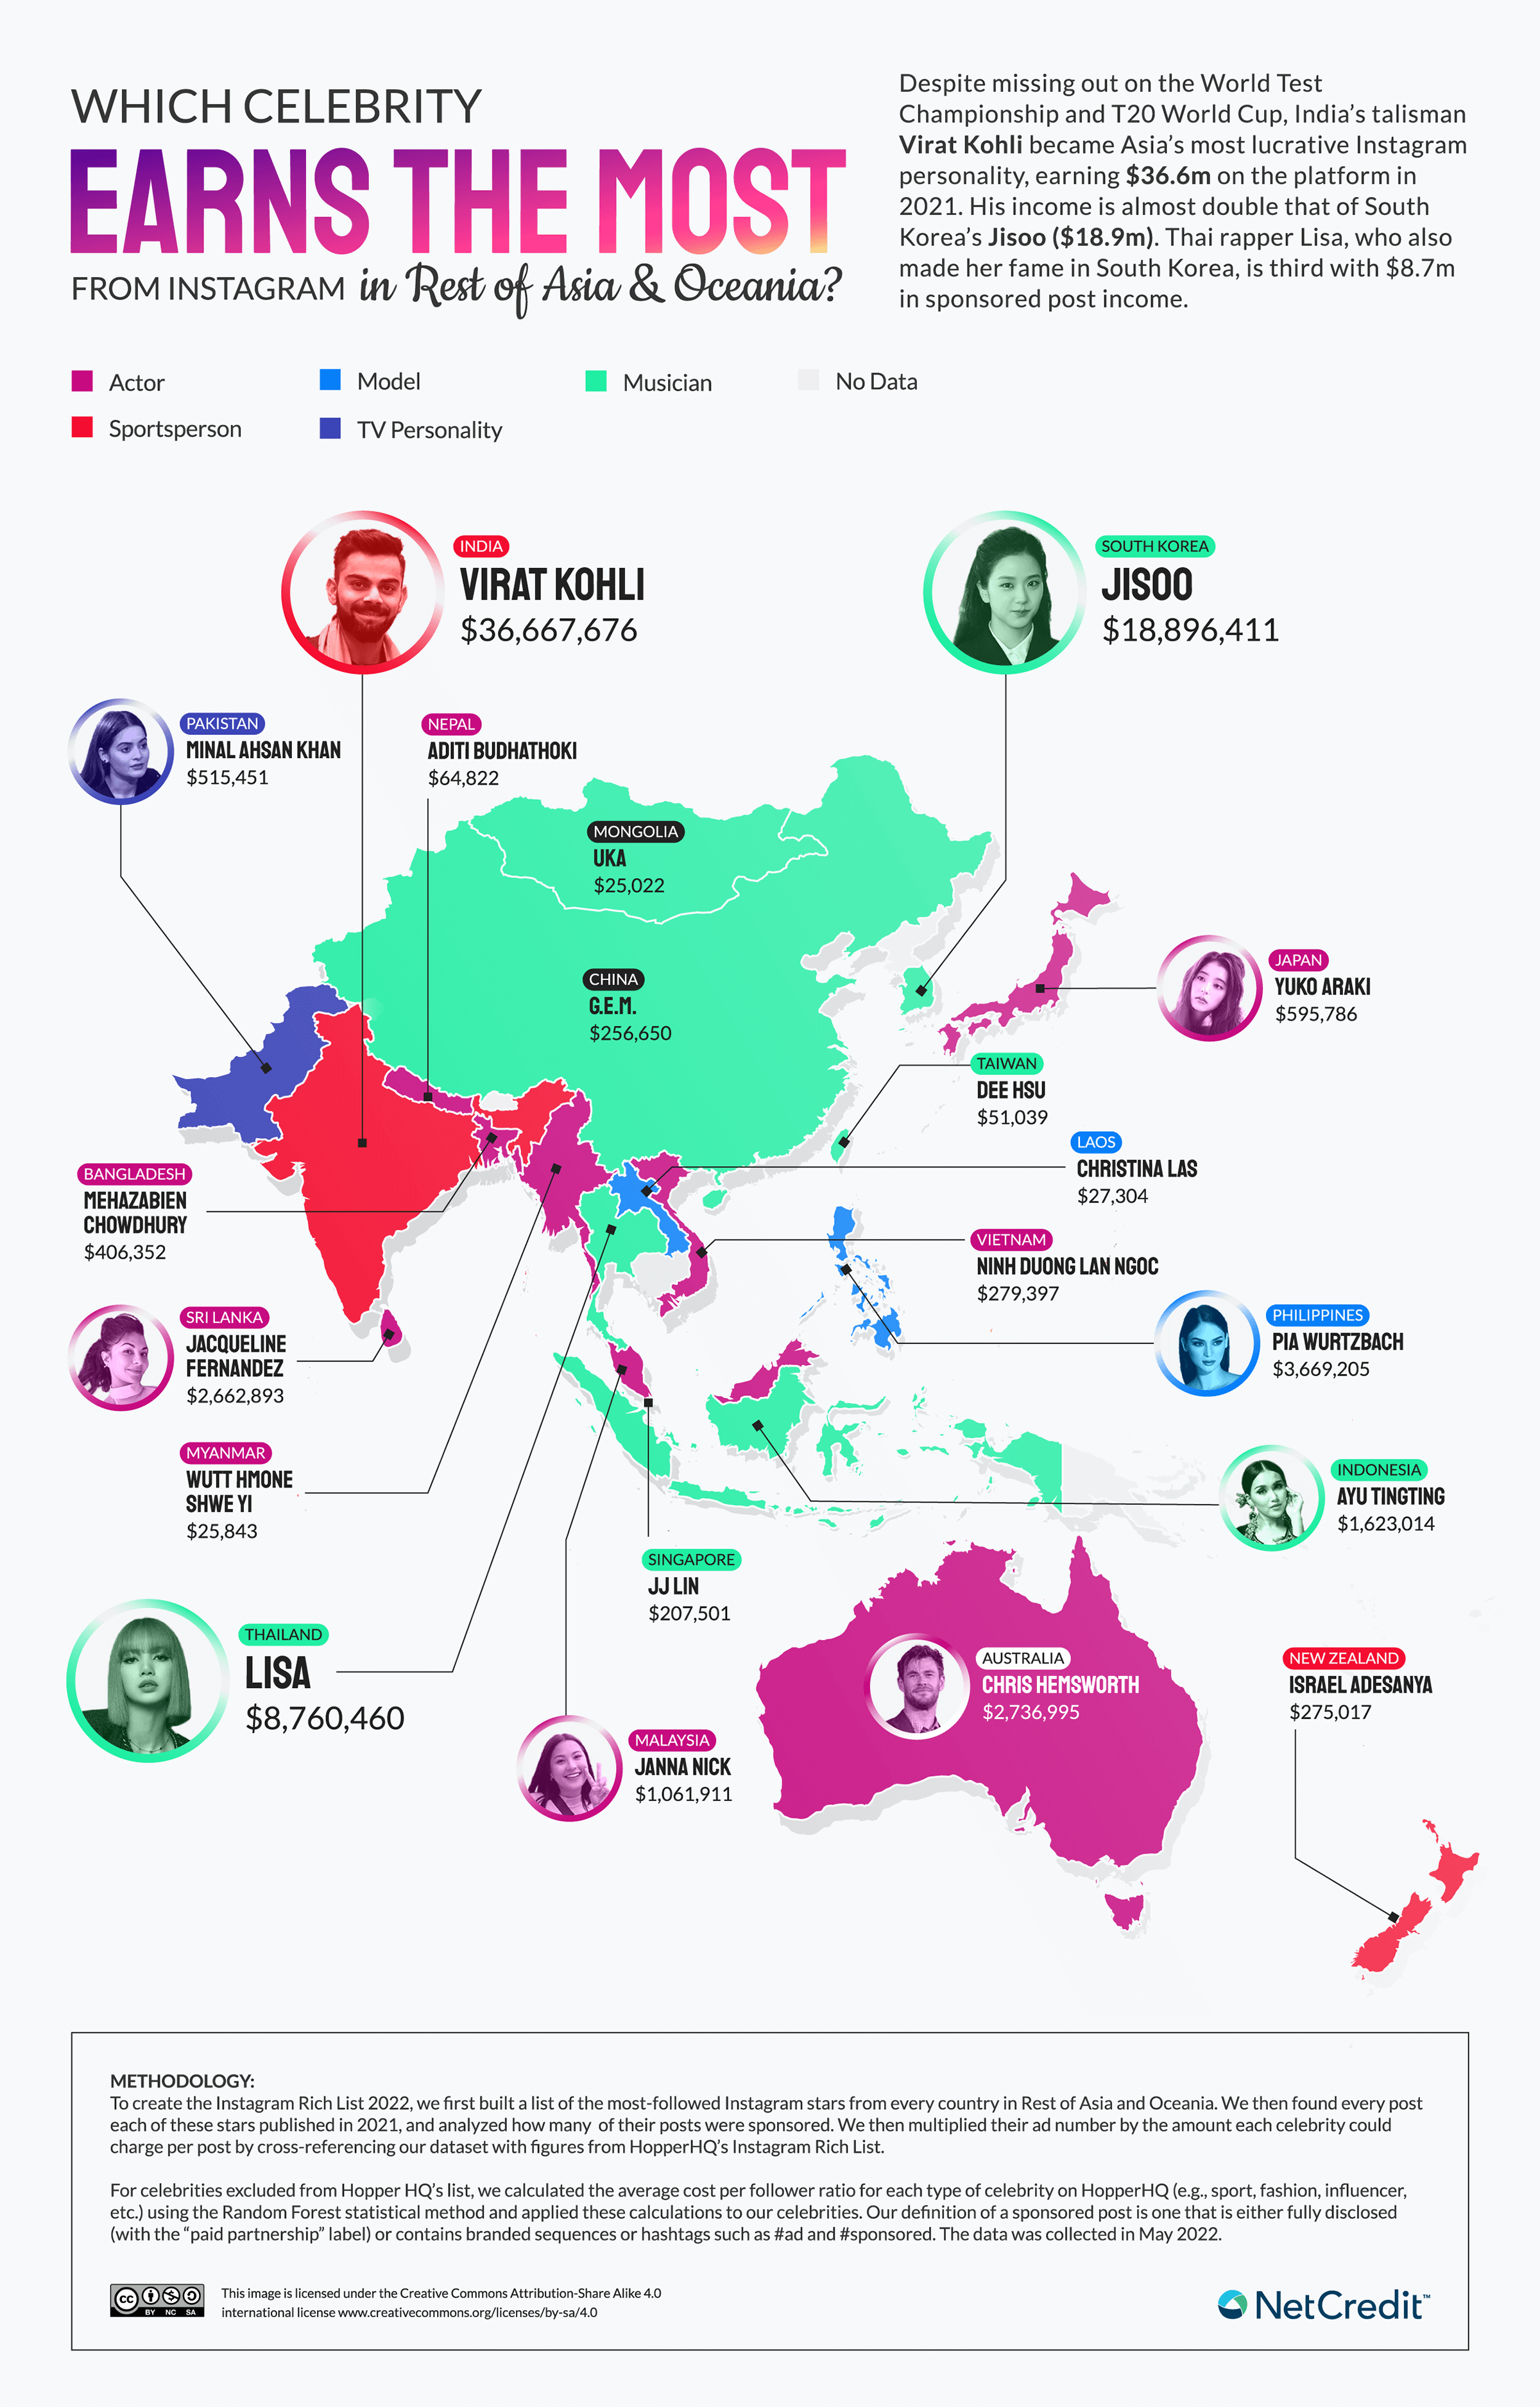 Map of Asia with top-earning Instagram celebrities